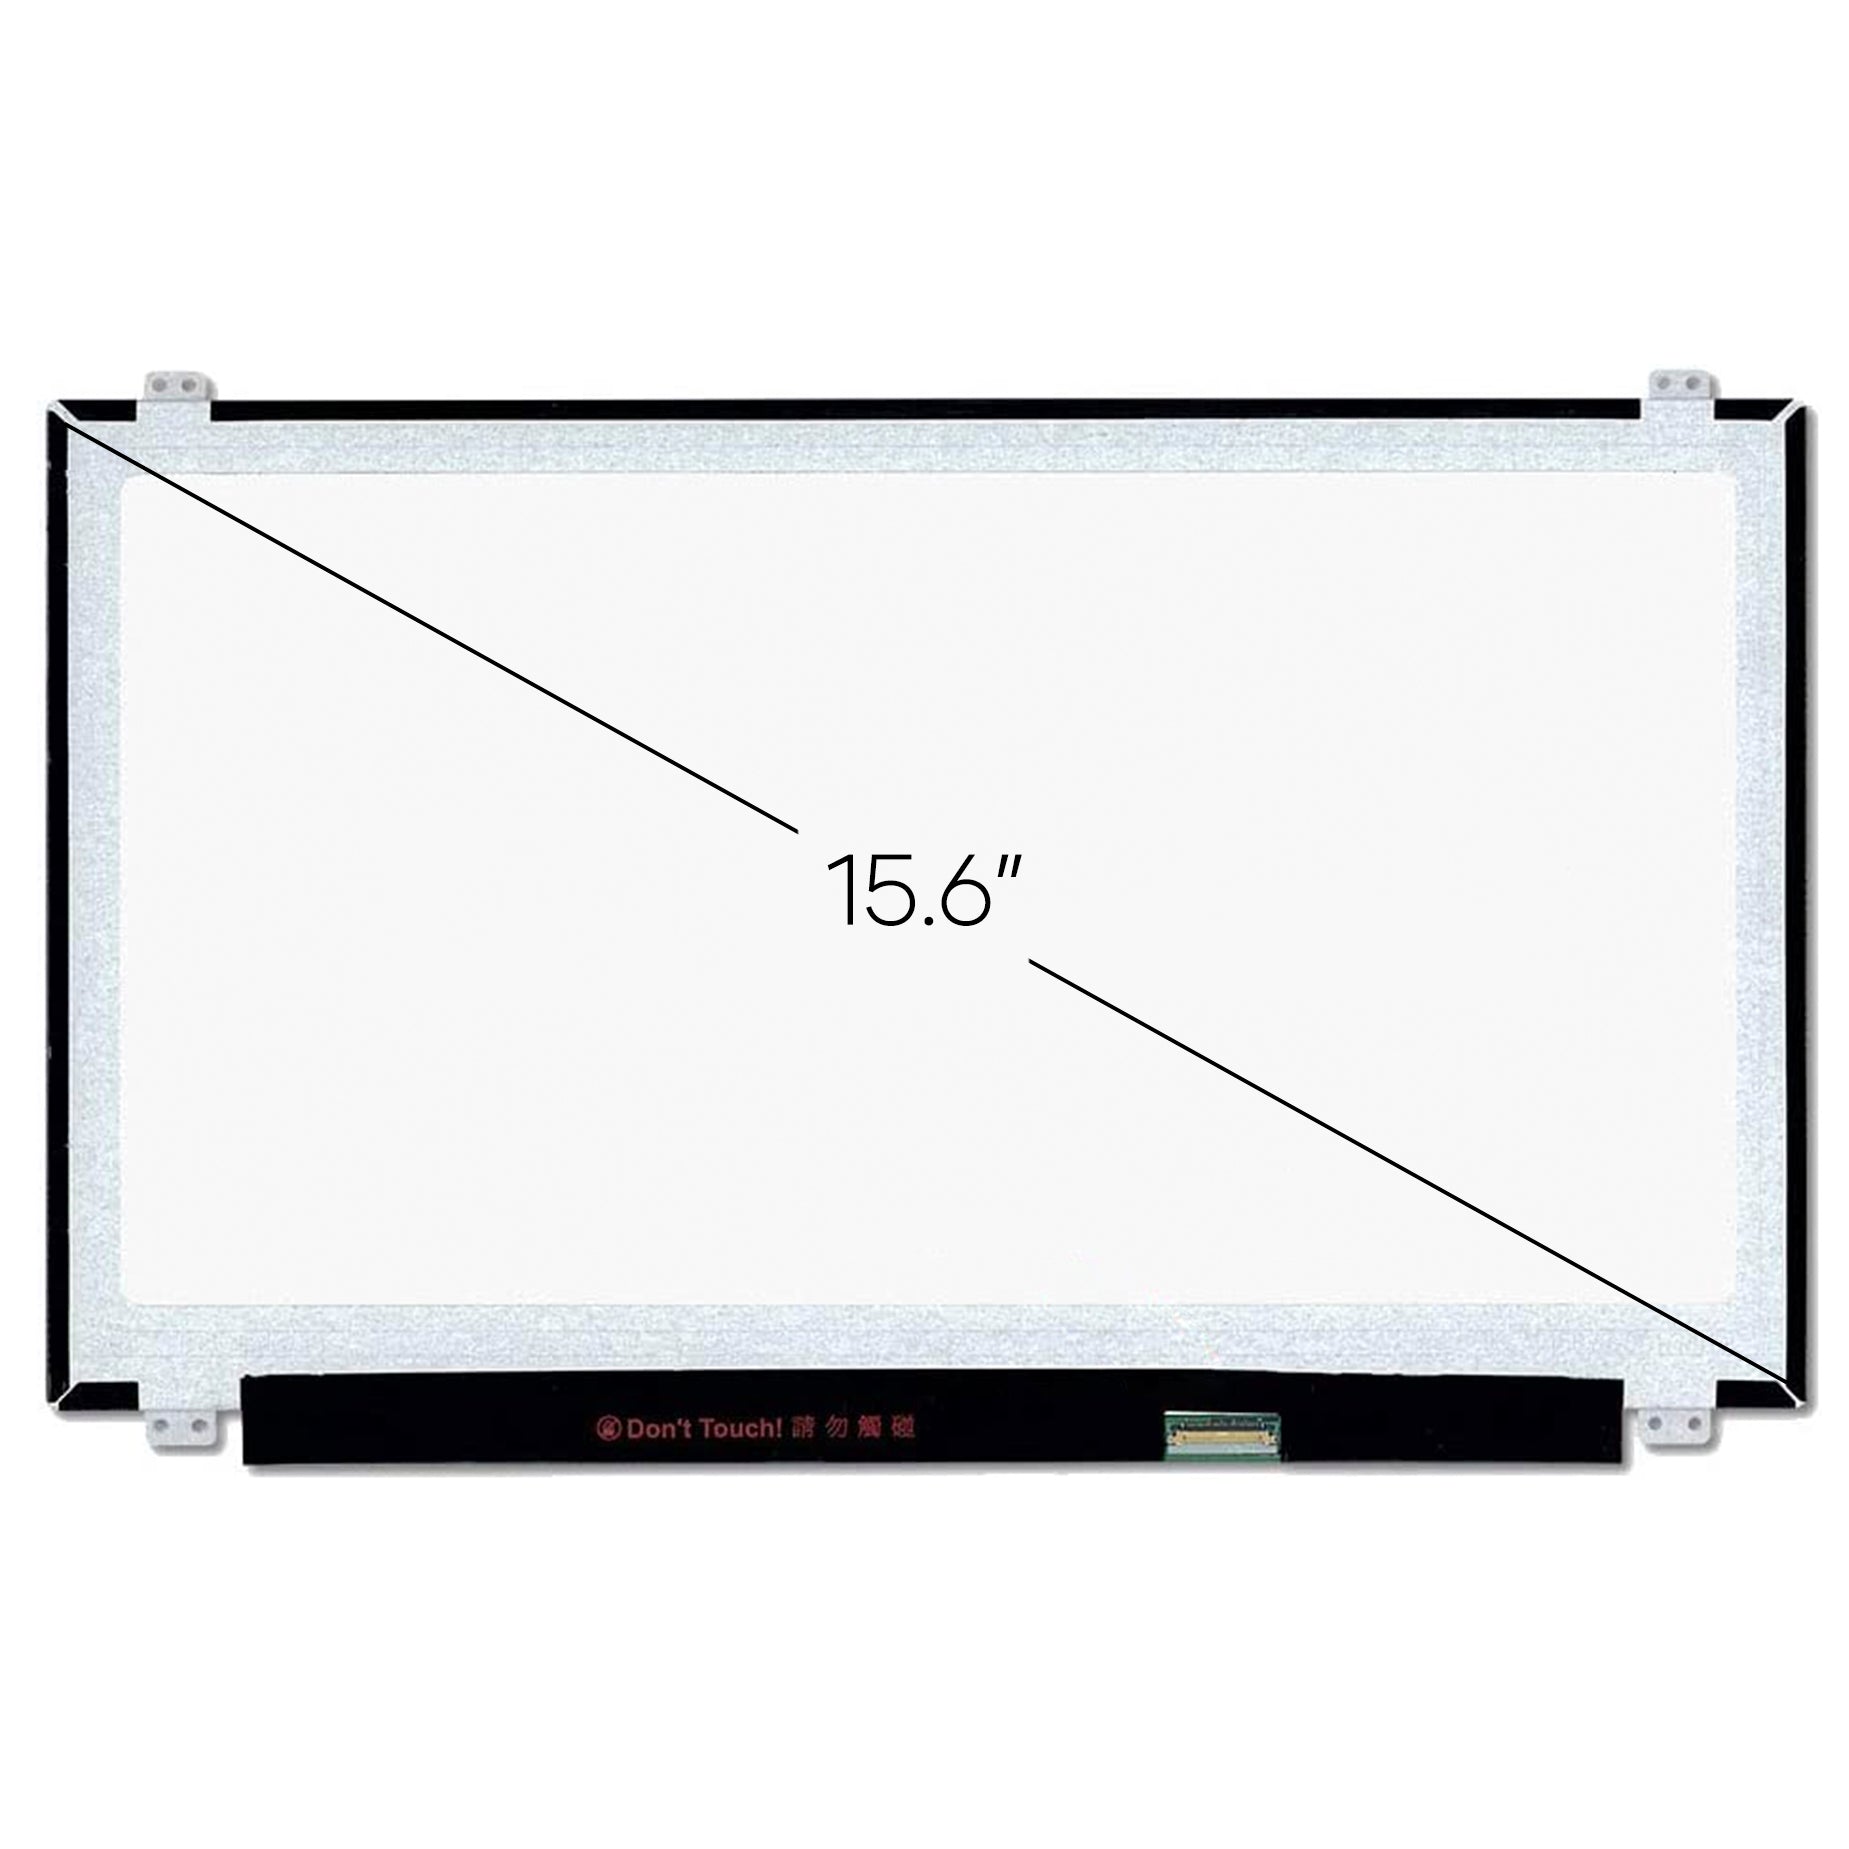 Screen Replacement for G156HTN01.0 FHD 1920x1080 Matte LCD LED Display